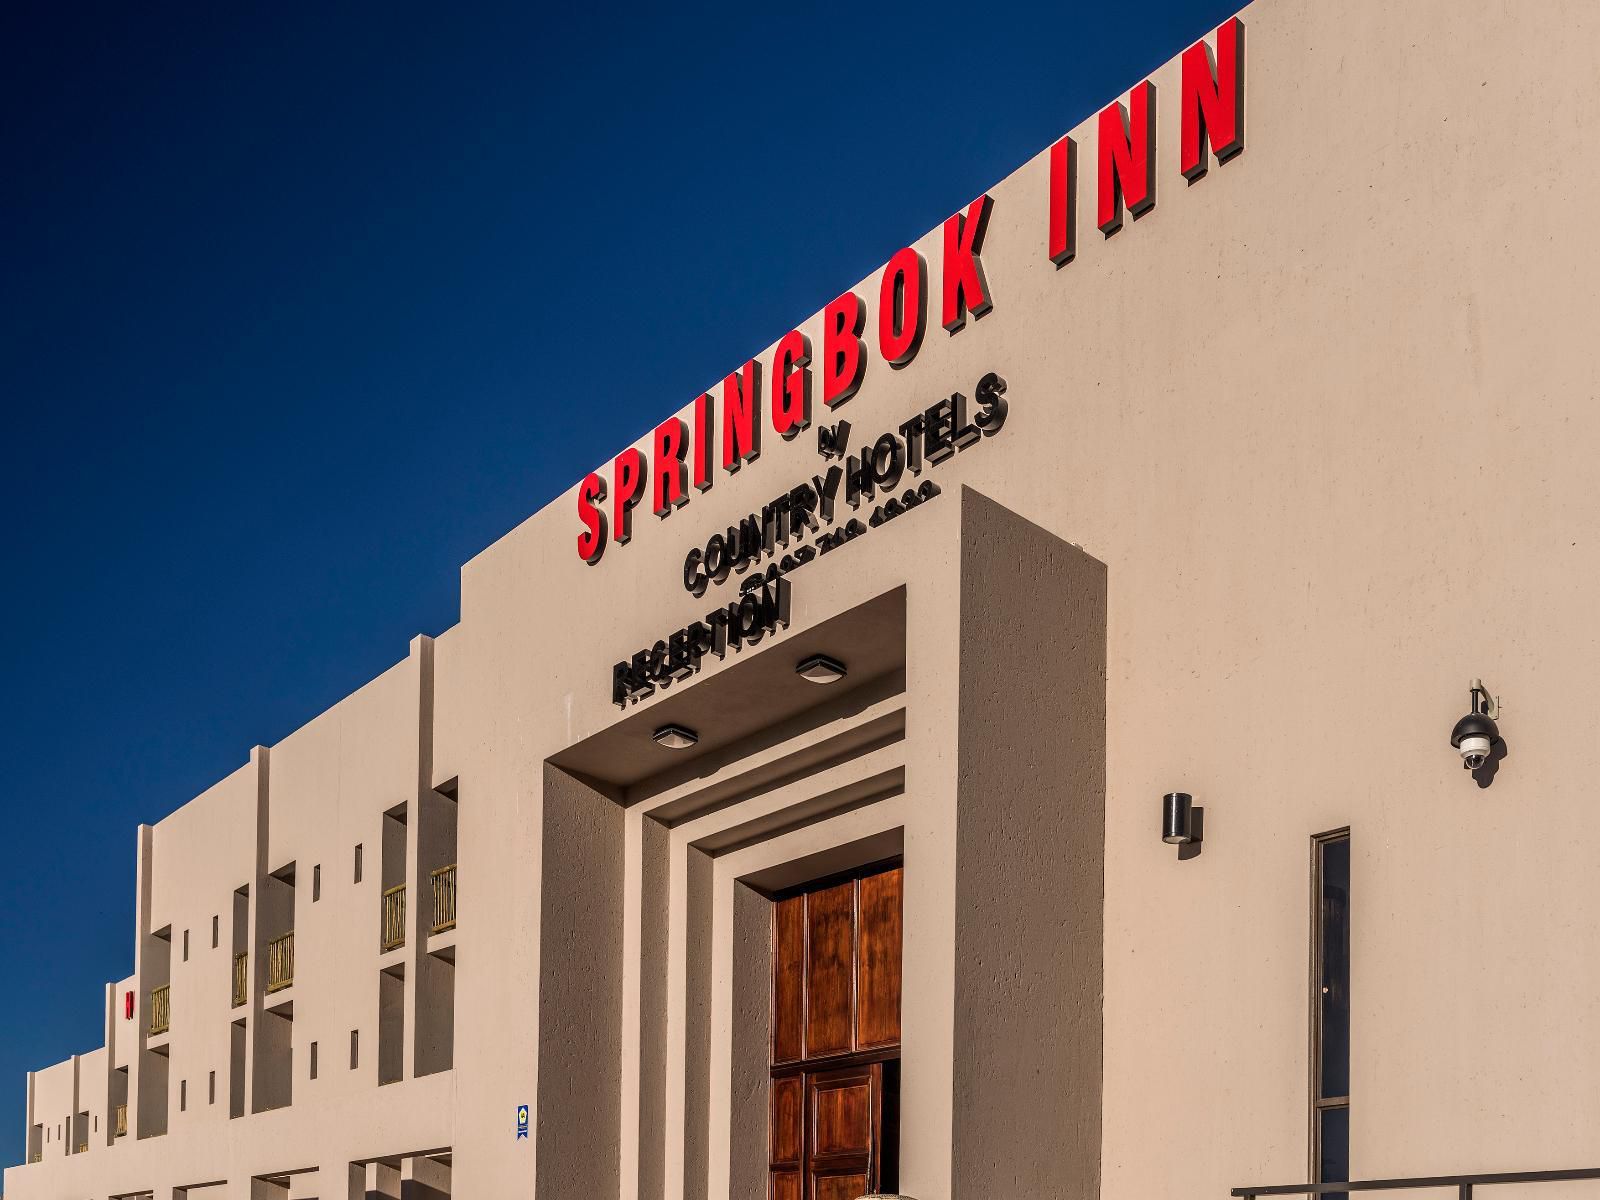 Springbok Inn Springbok Northern Cape South Africa Complementary Colors, Colorful, Sign